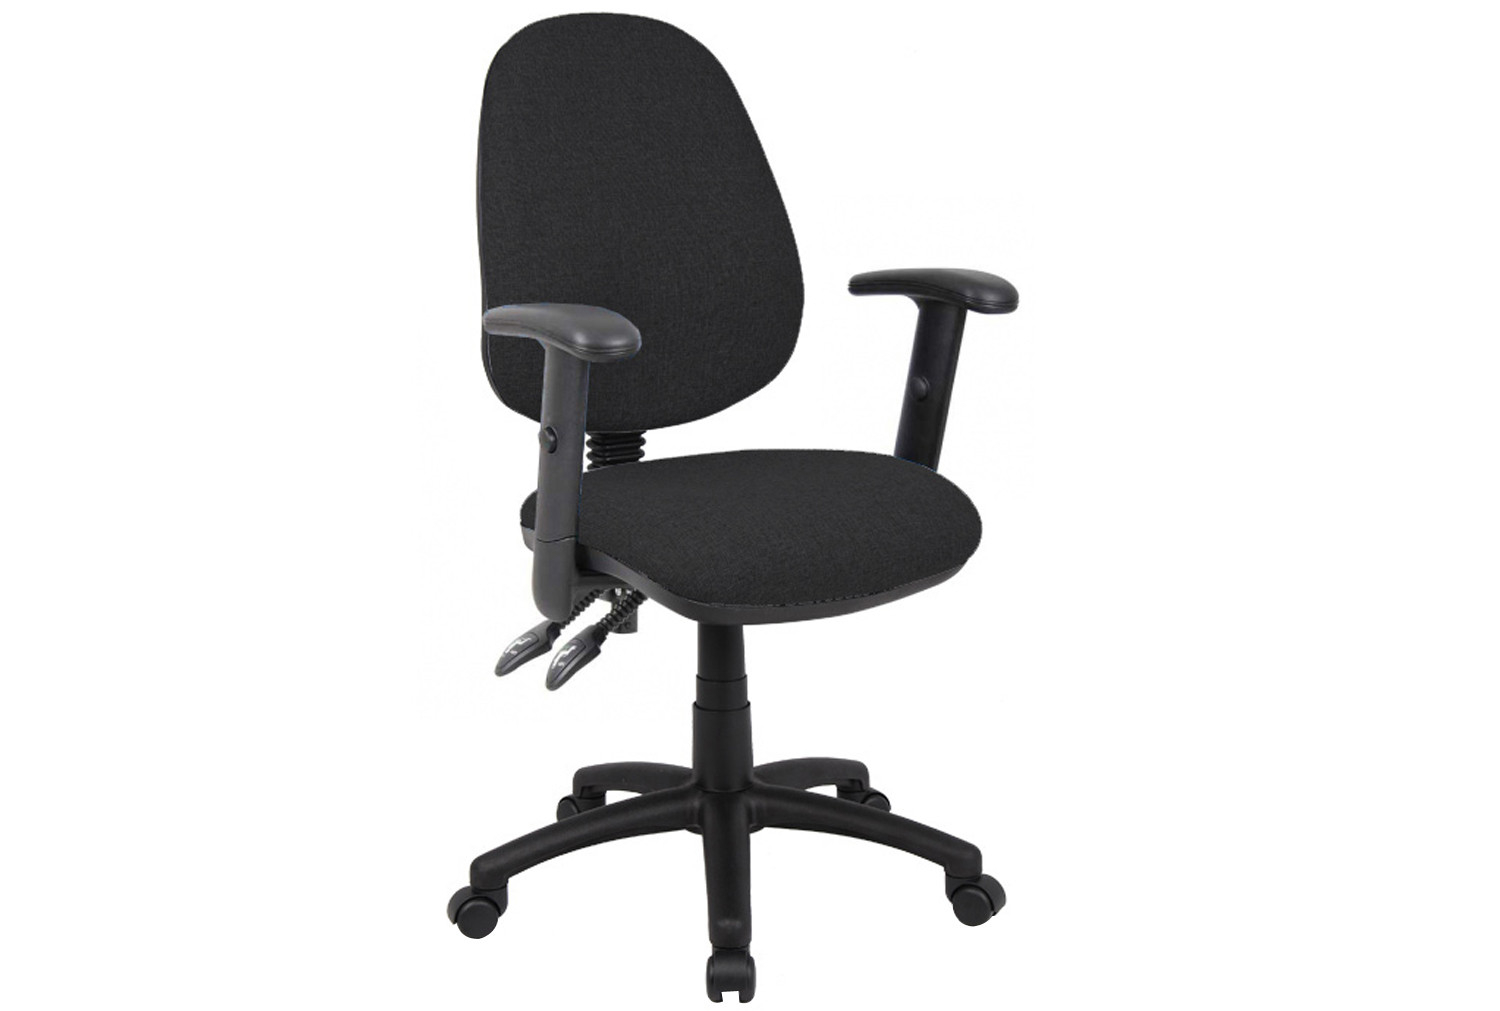 All Black 2 Lever Fabric Operator Office Chair With Adjustable Arms, Fully Installed